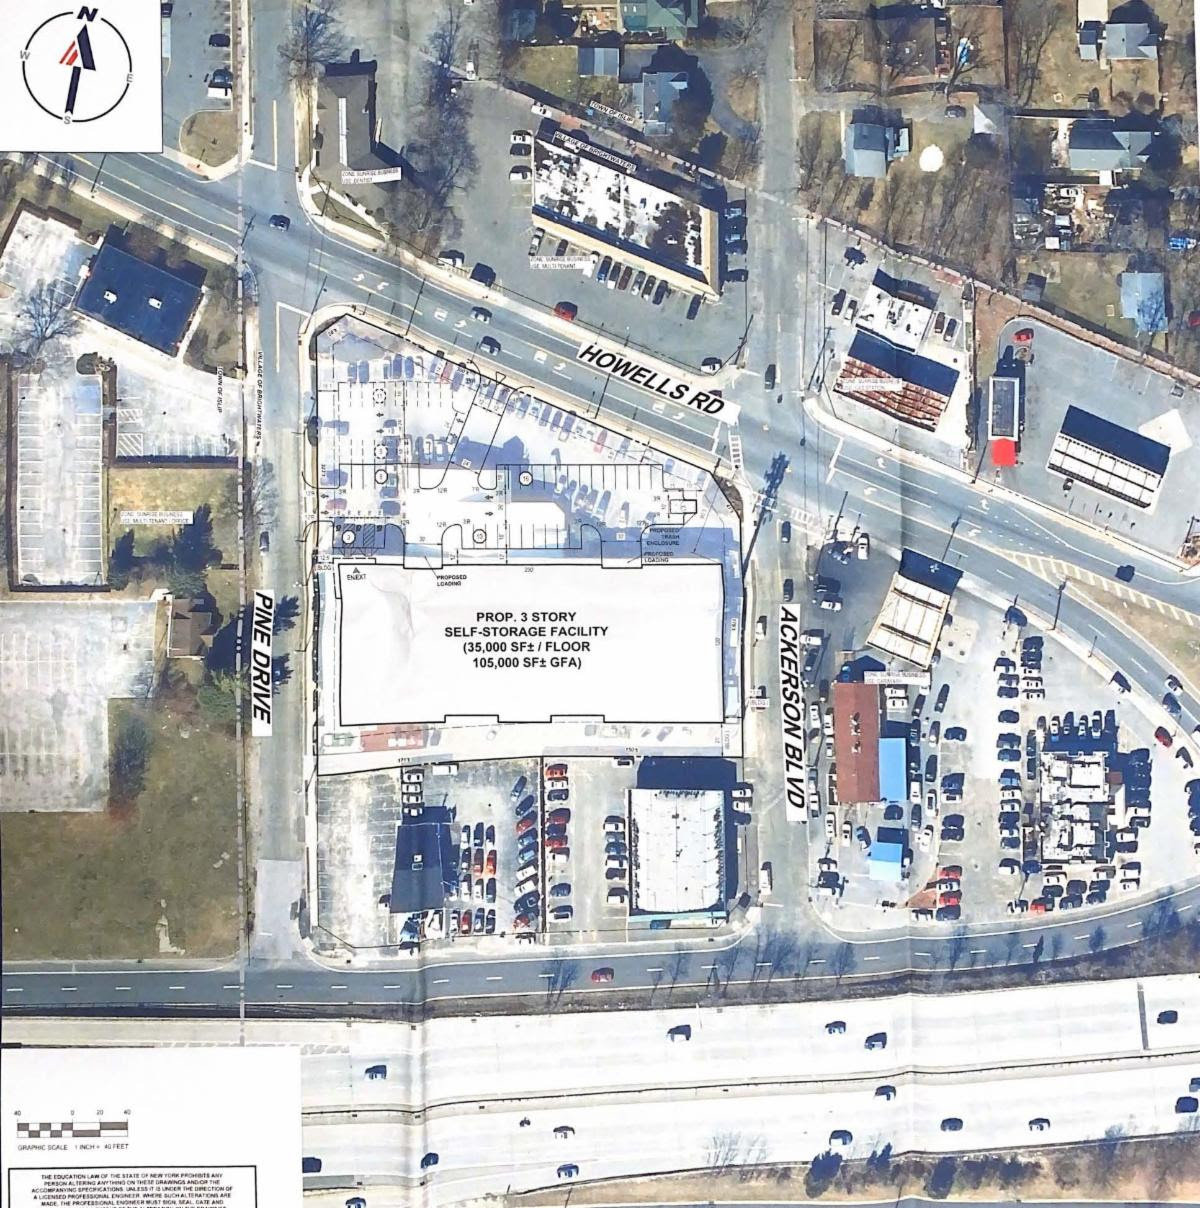 The proposed site of a self-storage facility in Brightwaters.